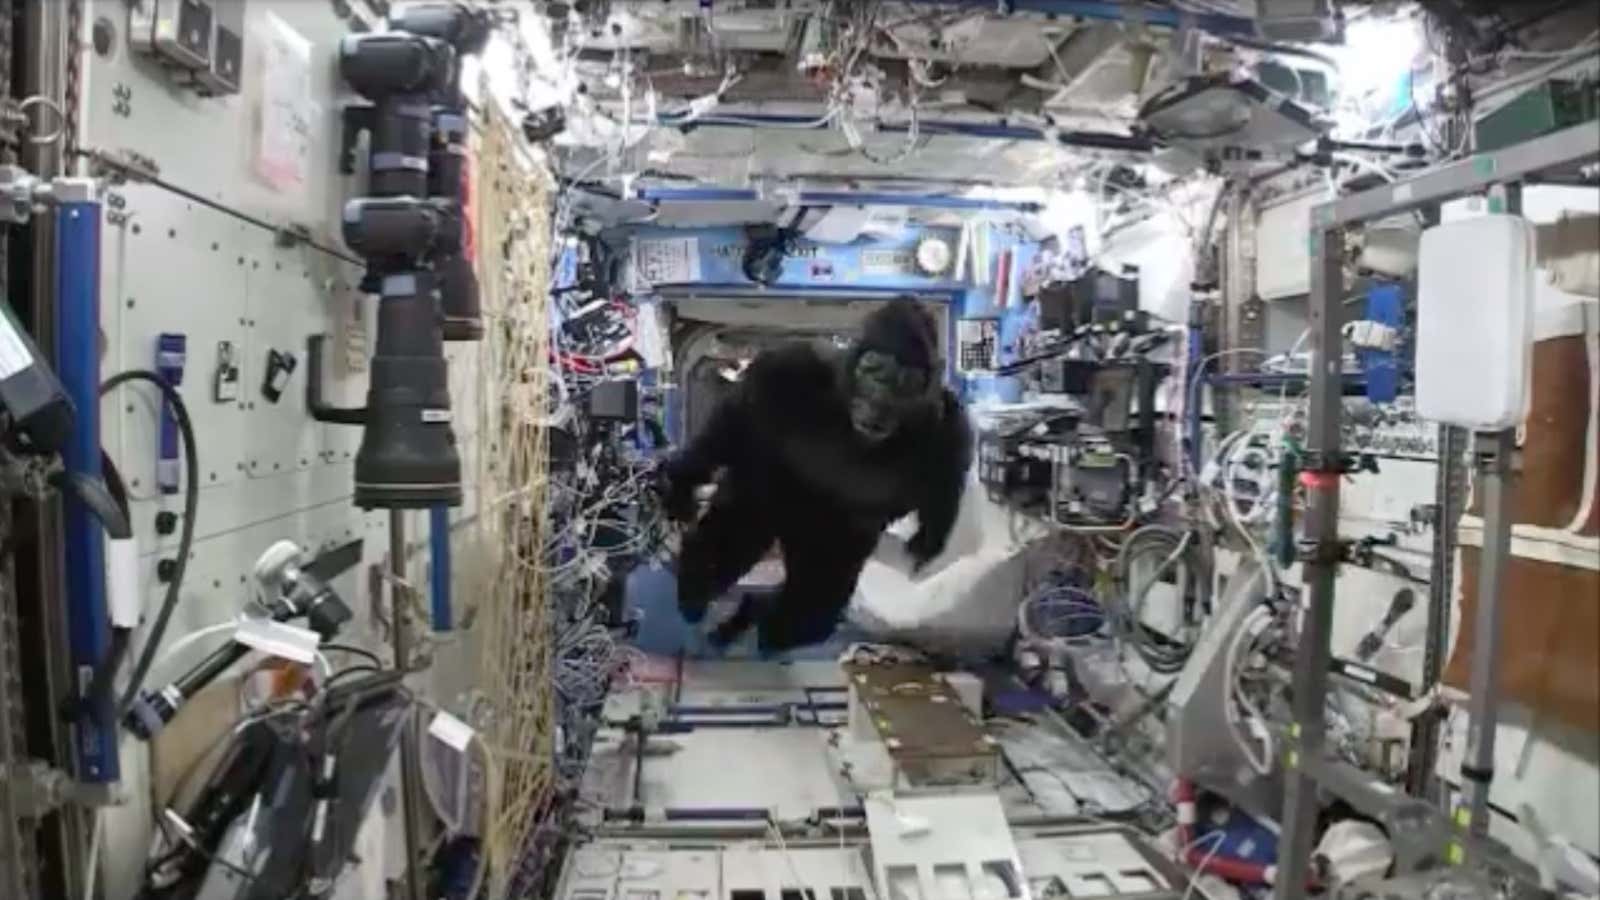 Watch out for the space gorilla!